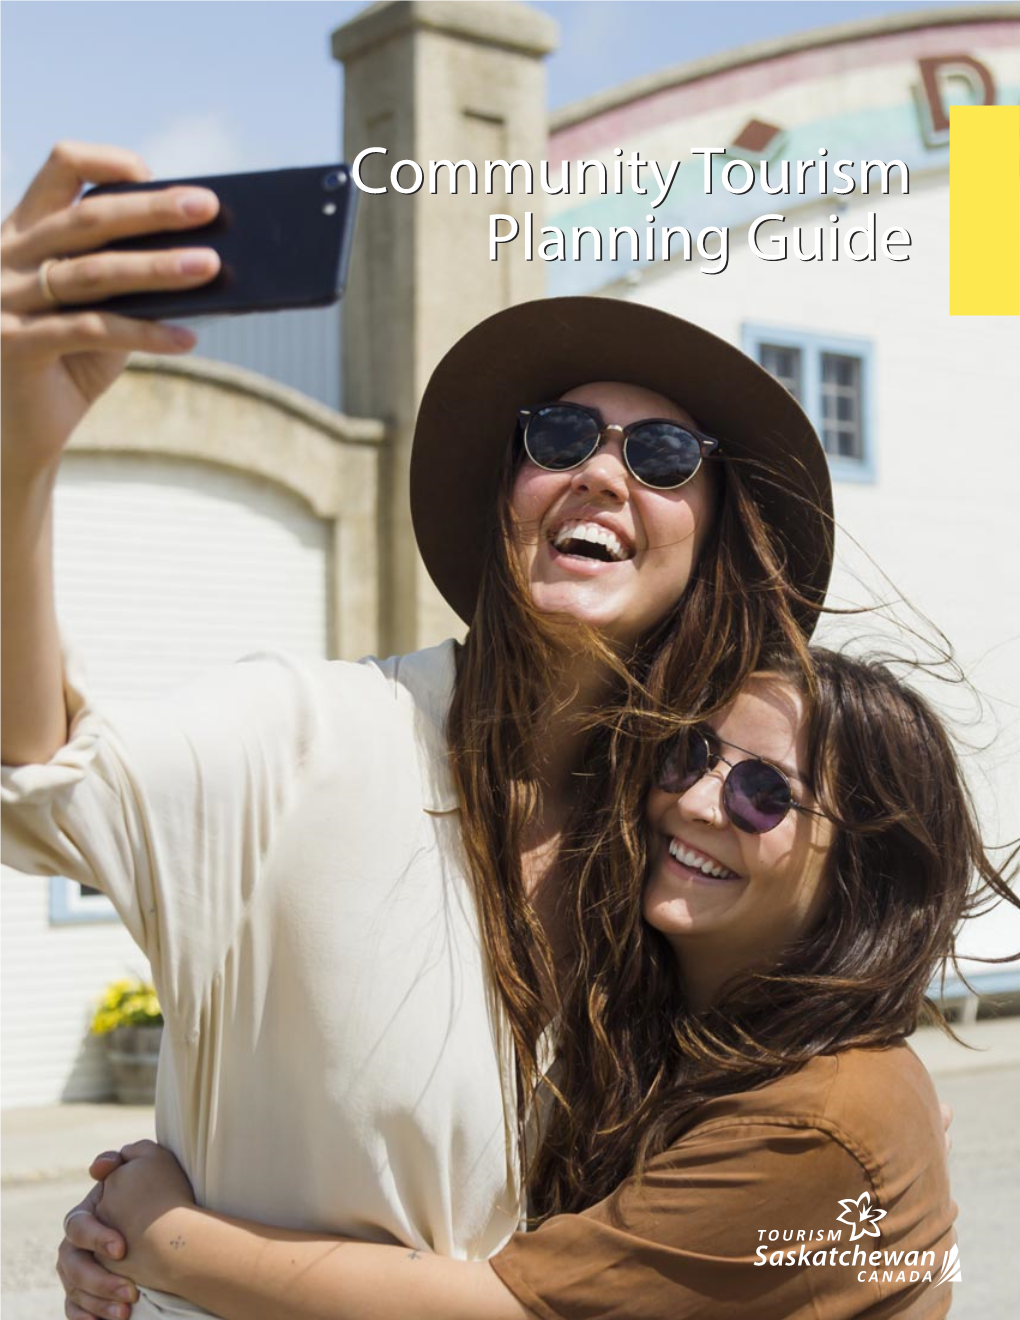 Community Tourism Planning Guide 2020